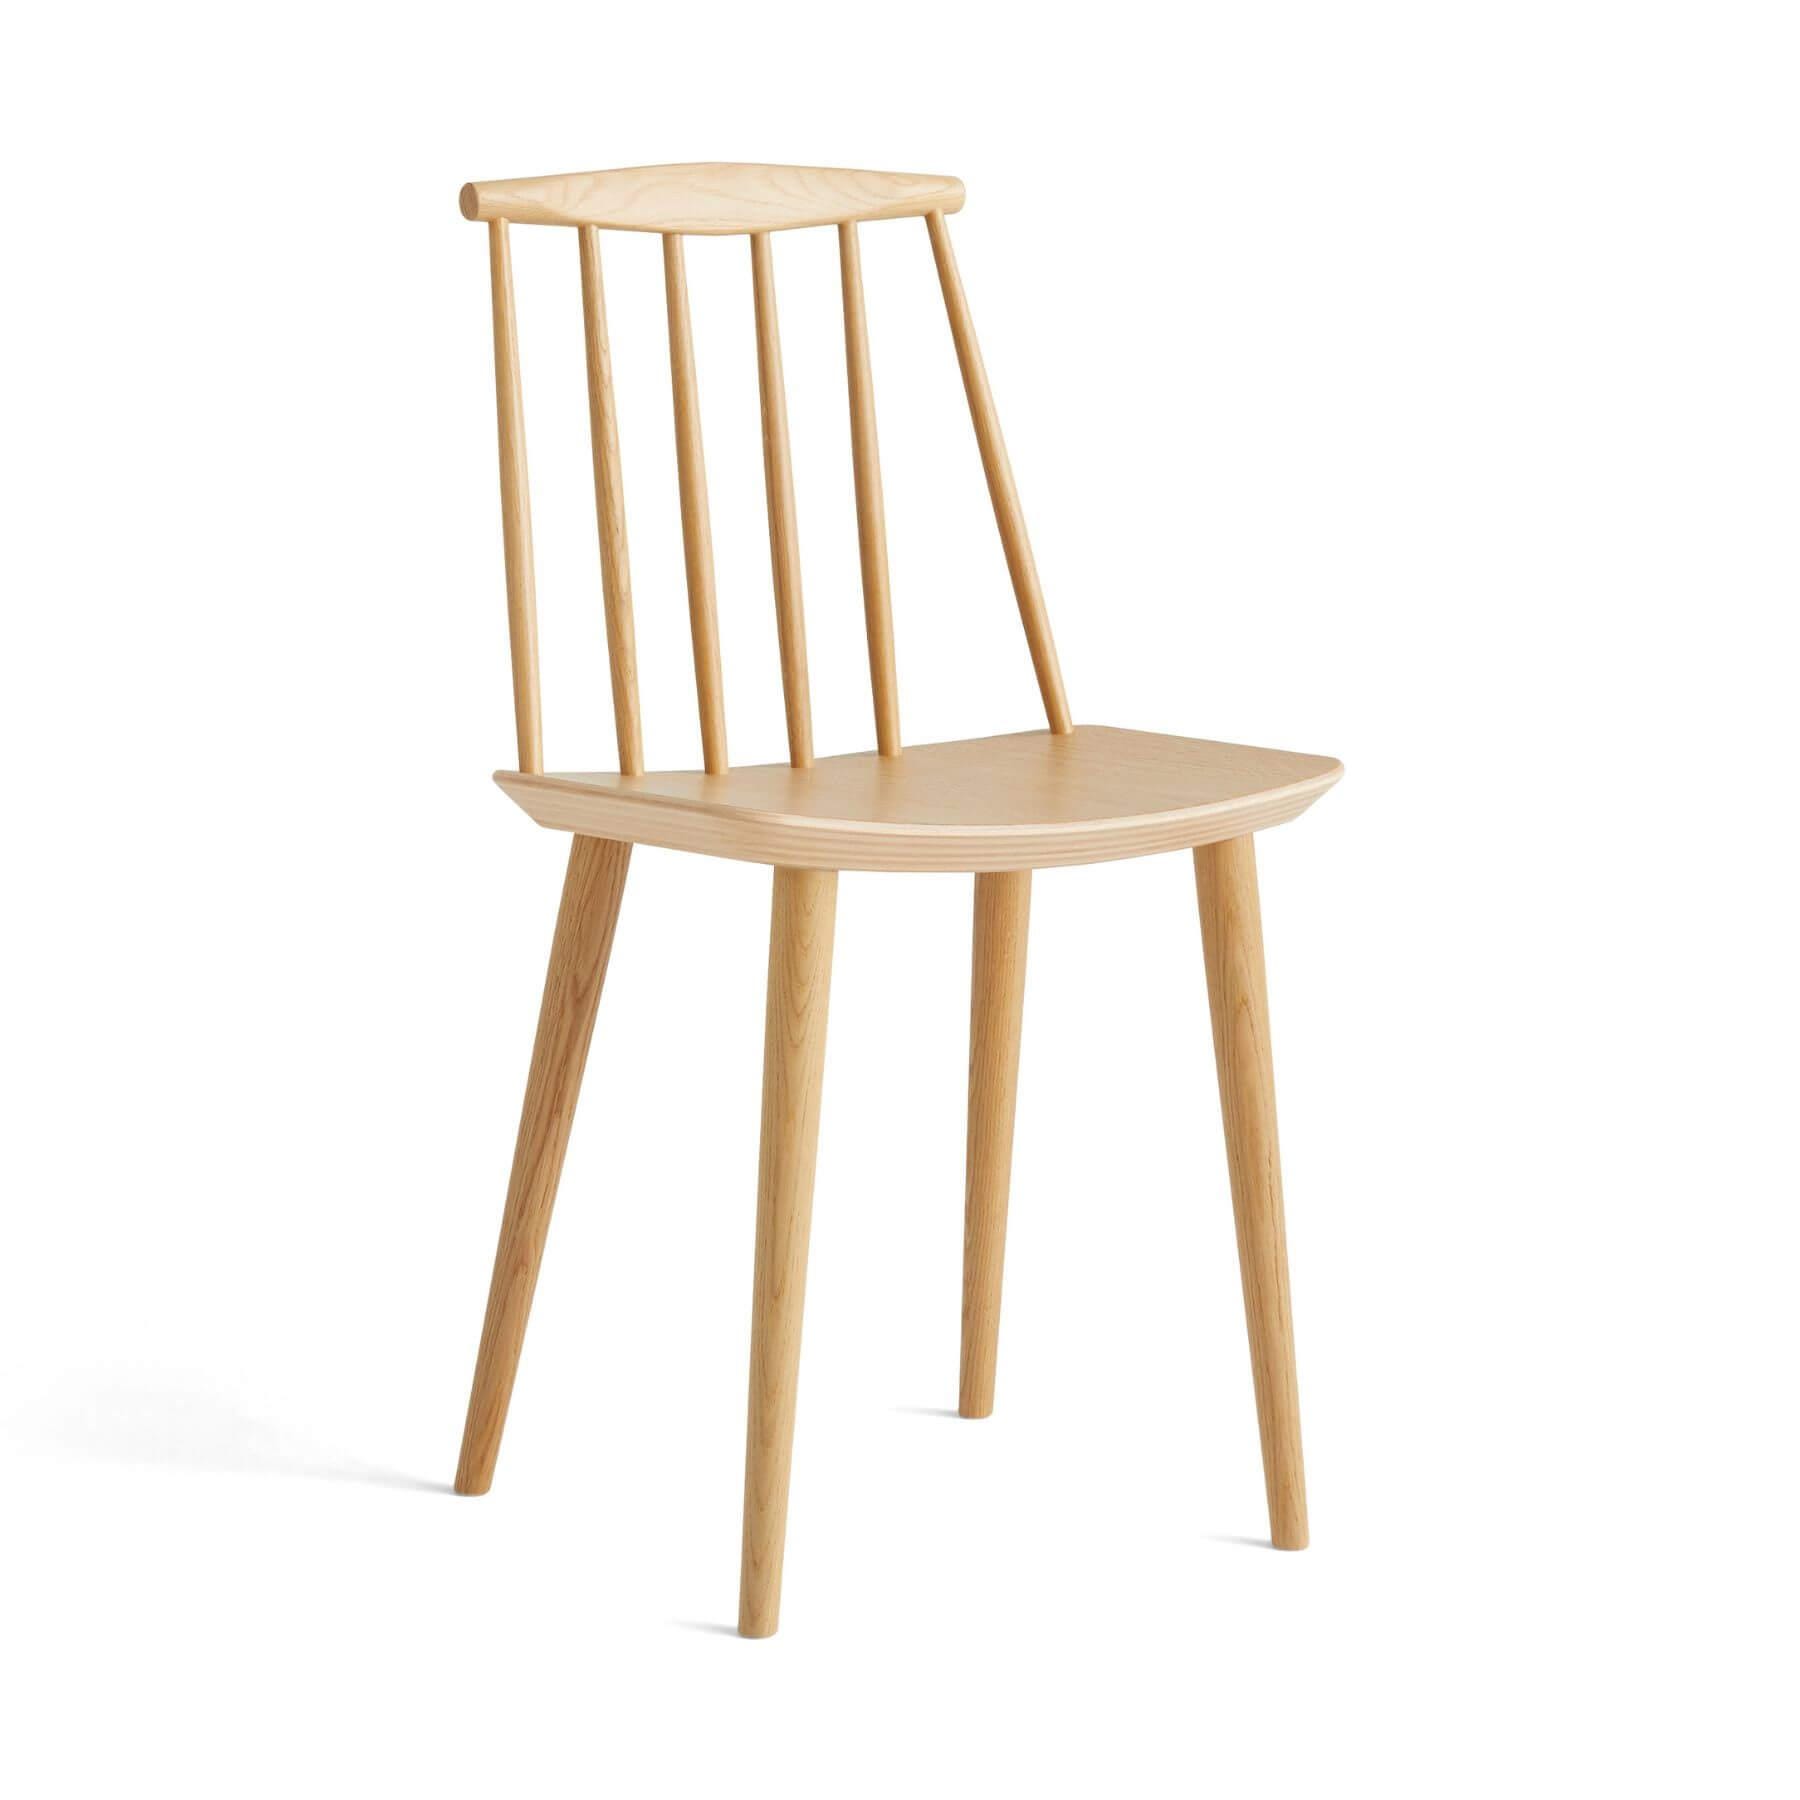 Hay Jseries 77 Dining Chair Lacquered Oak Light Wood Designer Furniture From Holloways Of Ludlow